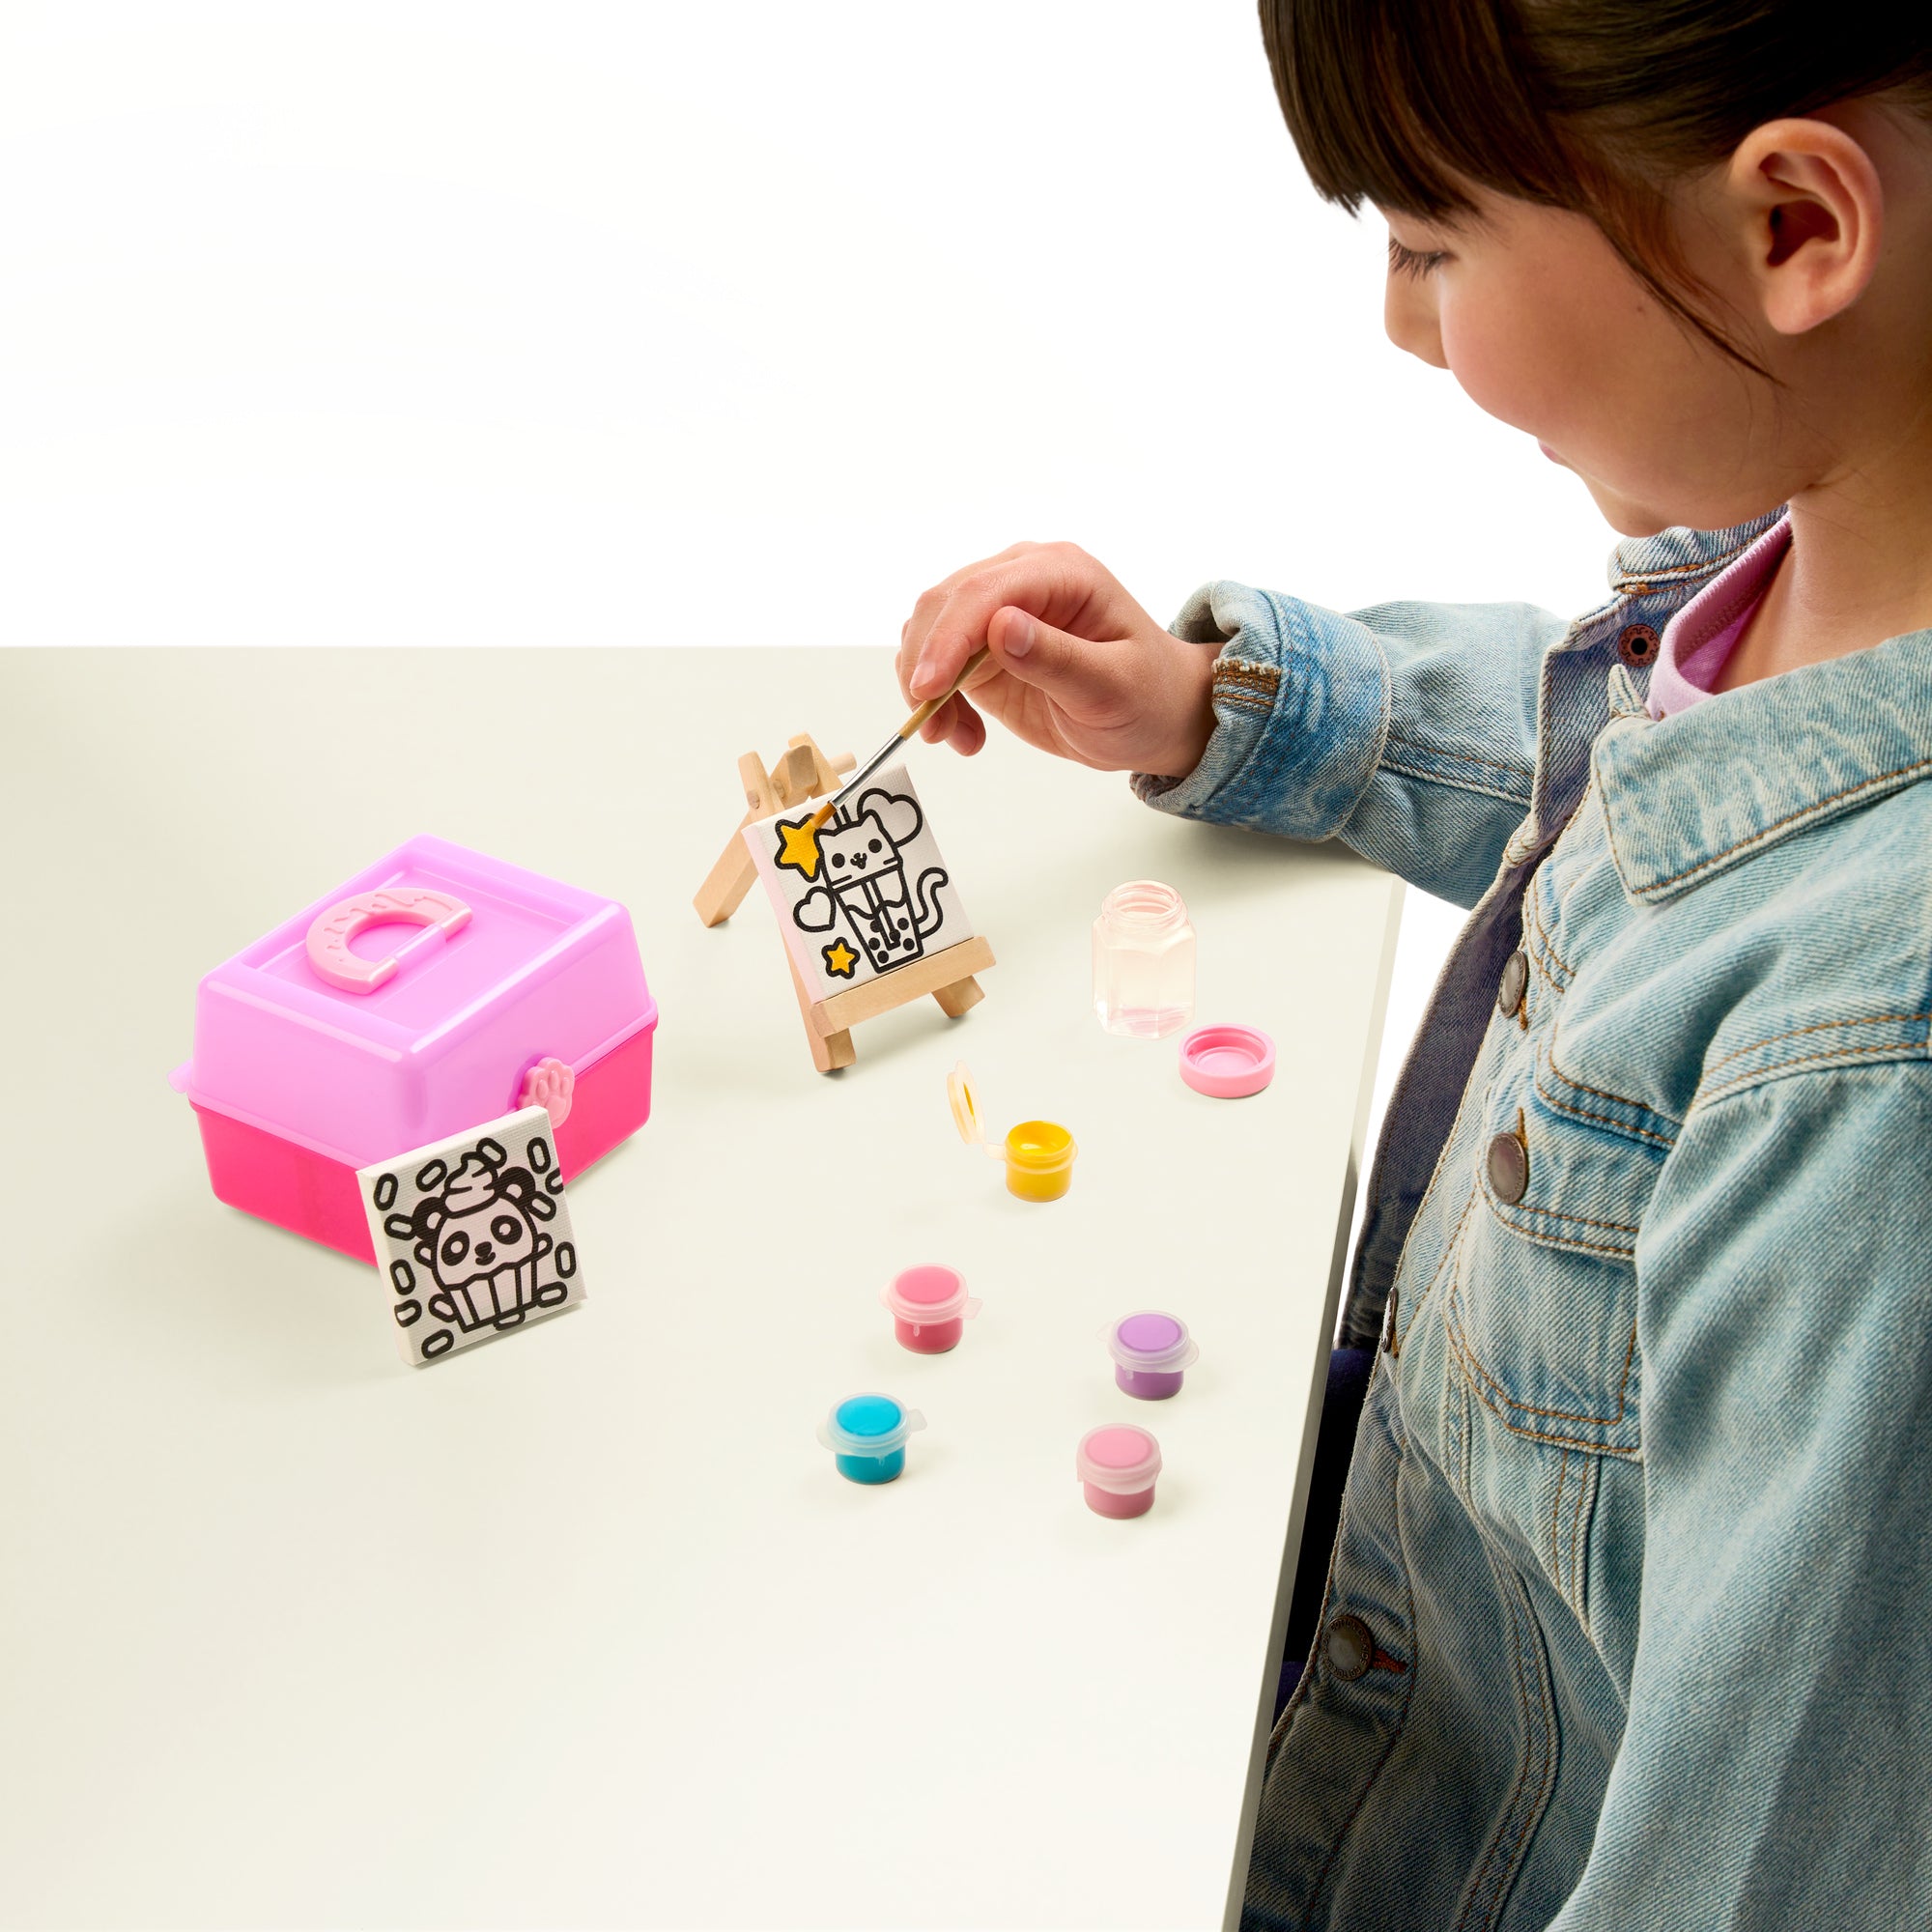 Real Littles - Collectible Micro Craft, Mini Craft Box with 1 of 6 Different Micro Craft Projects to Make with Micro Working Accessories Inside!